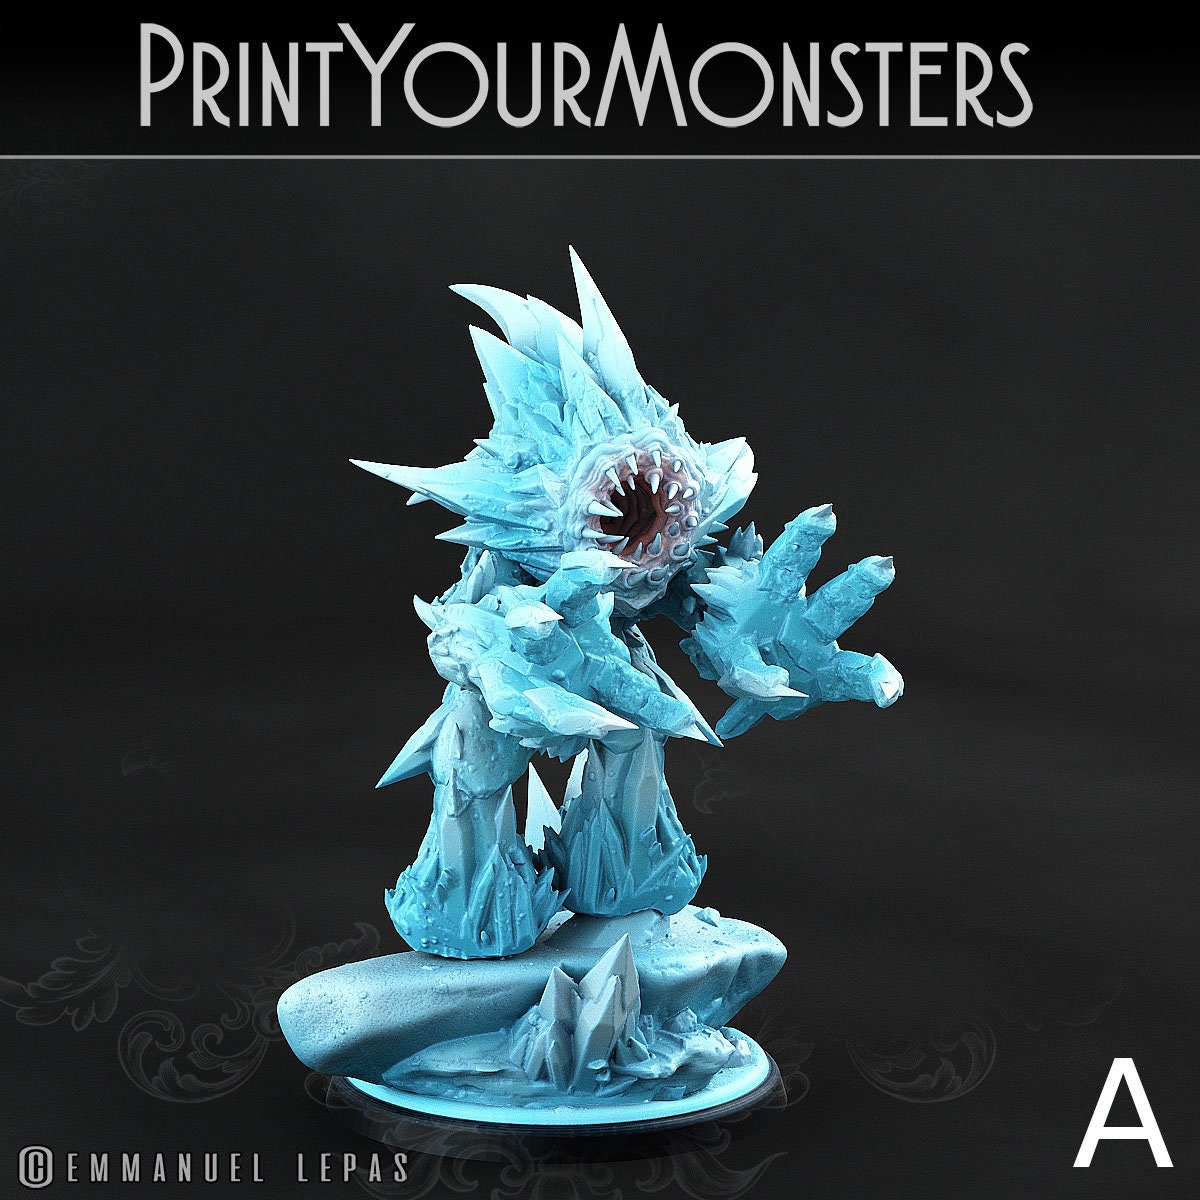 Ice Creatures - Print Your Monsters 